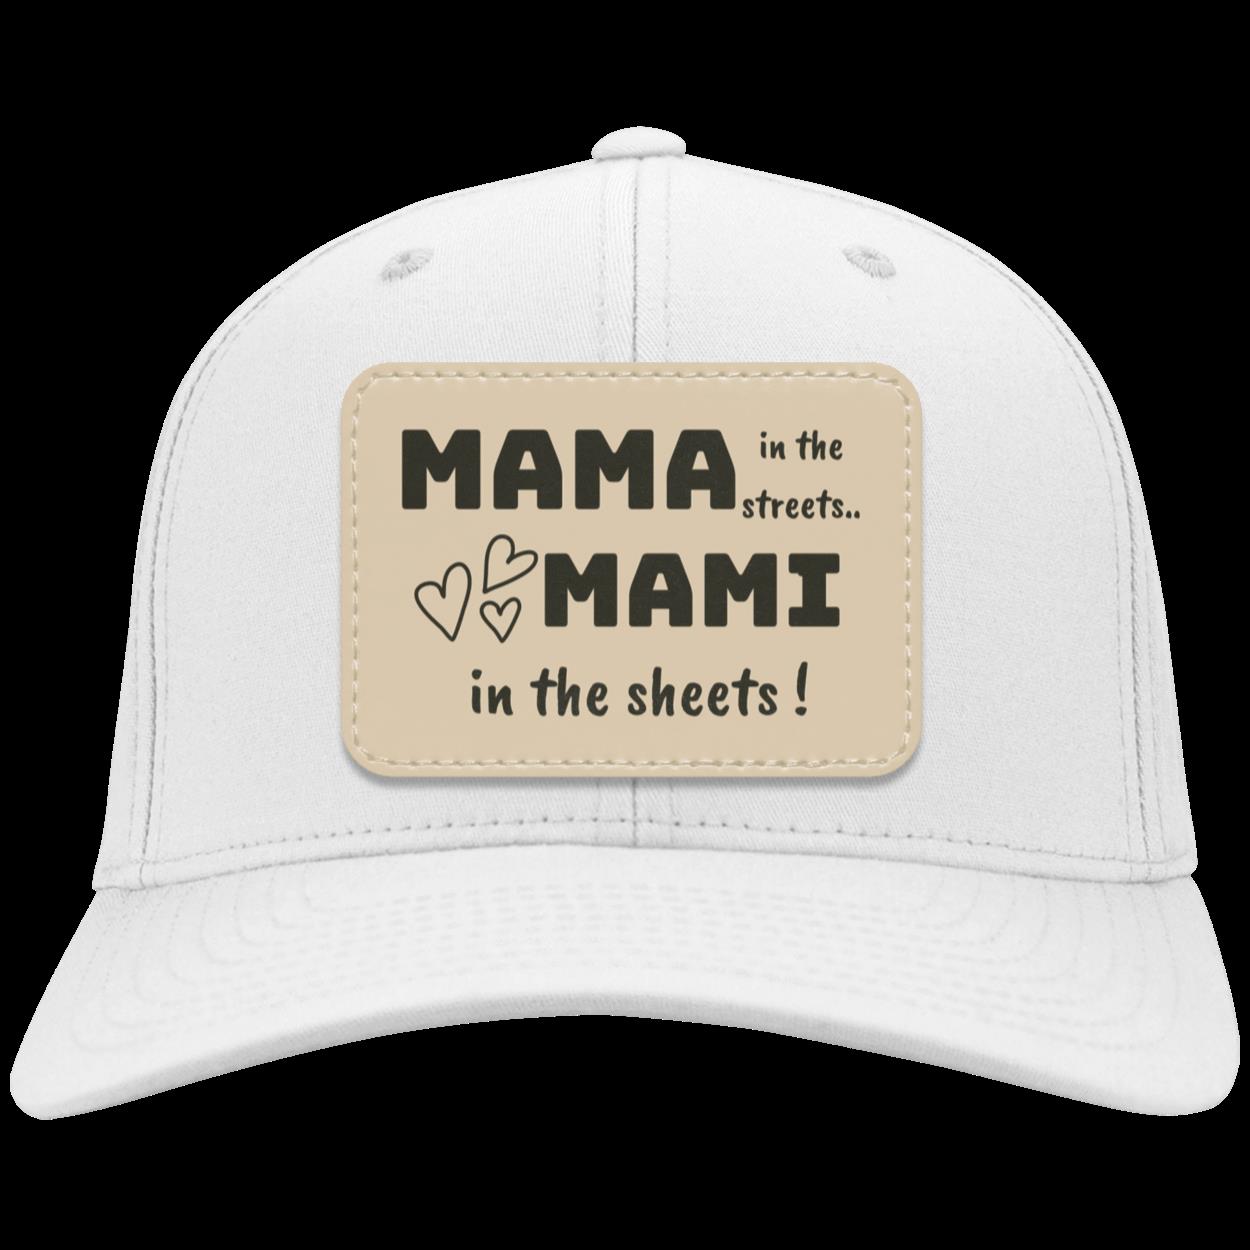 " Mama in the streets, Mami in the sheets" Cotton Twill Cap